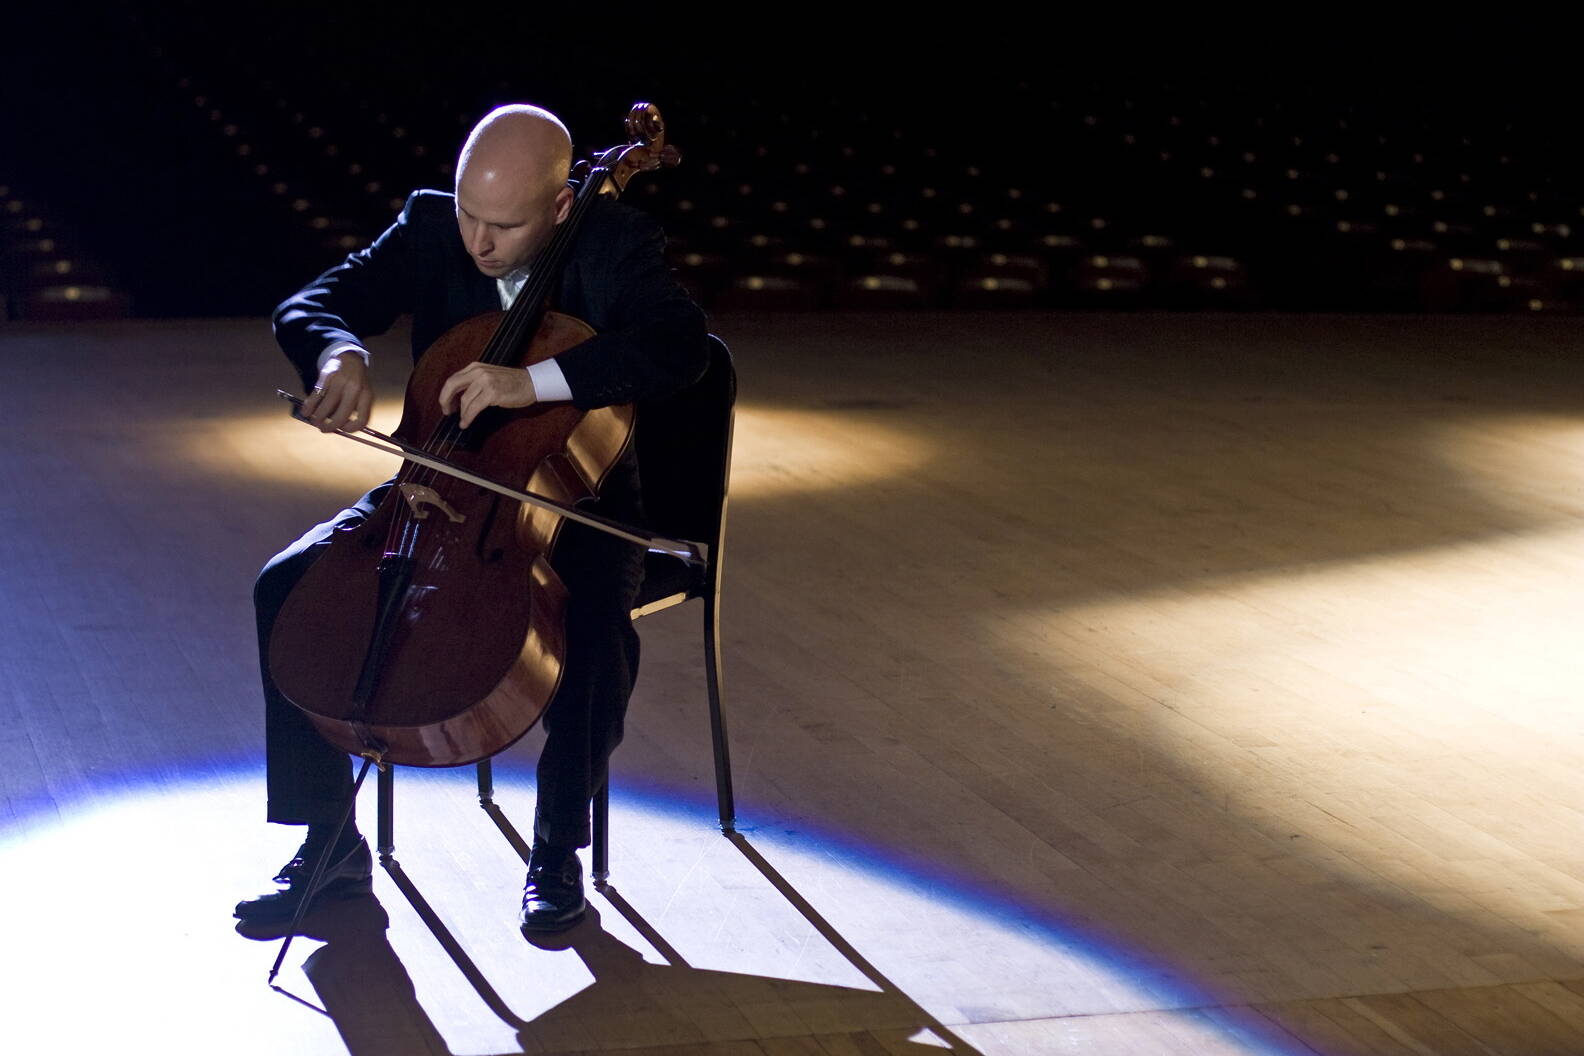 Robert DeMaine, principal cellist of the L.A. Philharmonic, is scheduled to perform Dvorak’s Cello Concerto during a pair of concerts this weekend by the Juneau Symphony. (Courtesy Photo/ Daniel Lippitt)